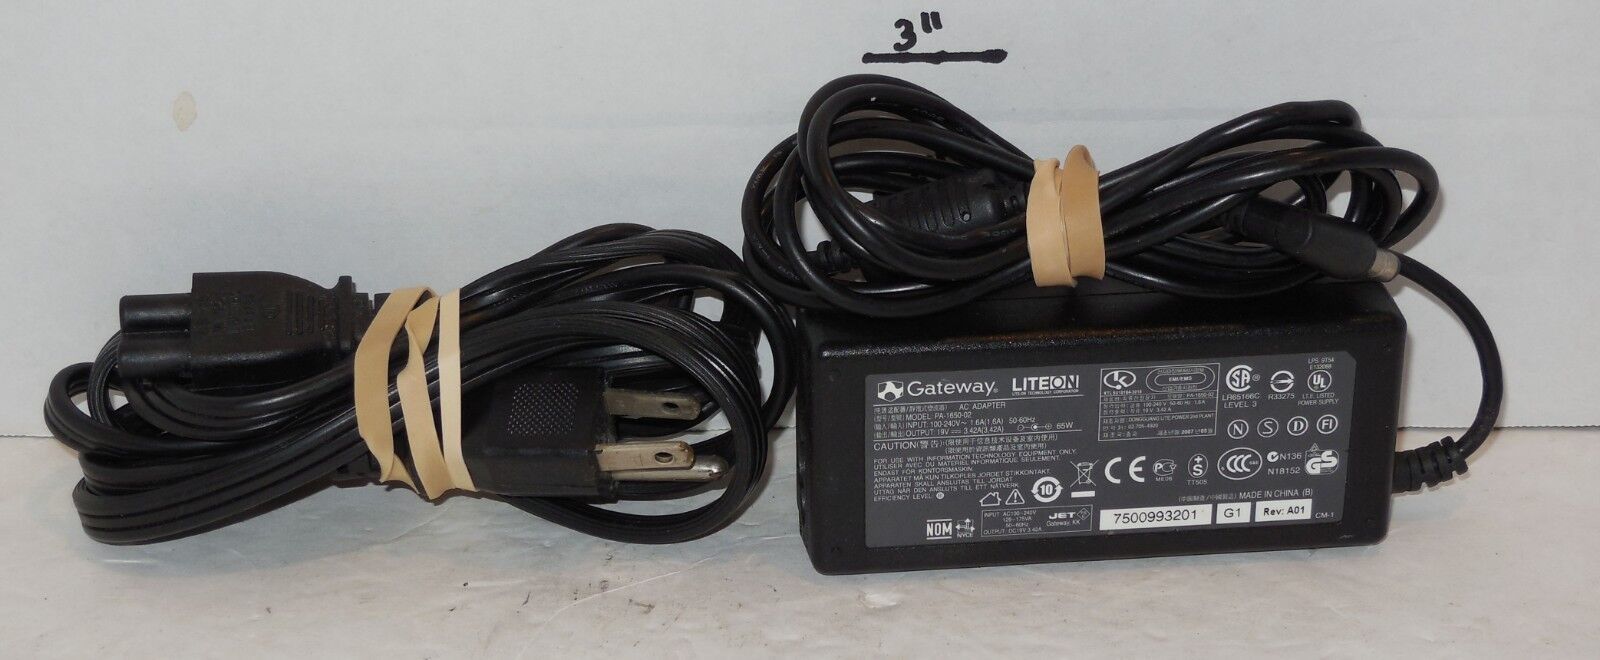 Primary image for Gateway Liteon Laptop AC Adapter Charger PA_1650-02 OEM Replacement